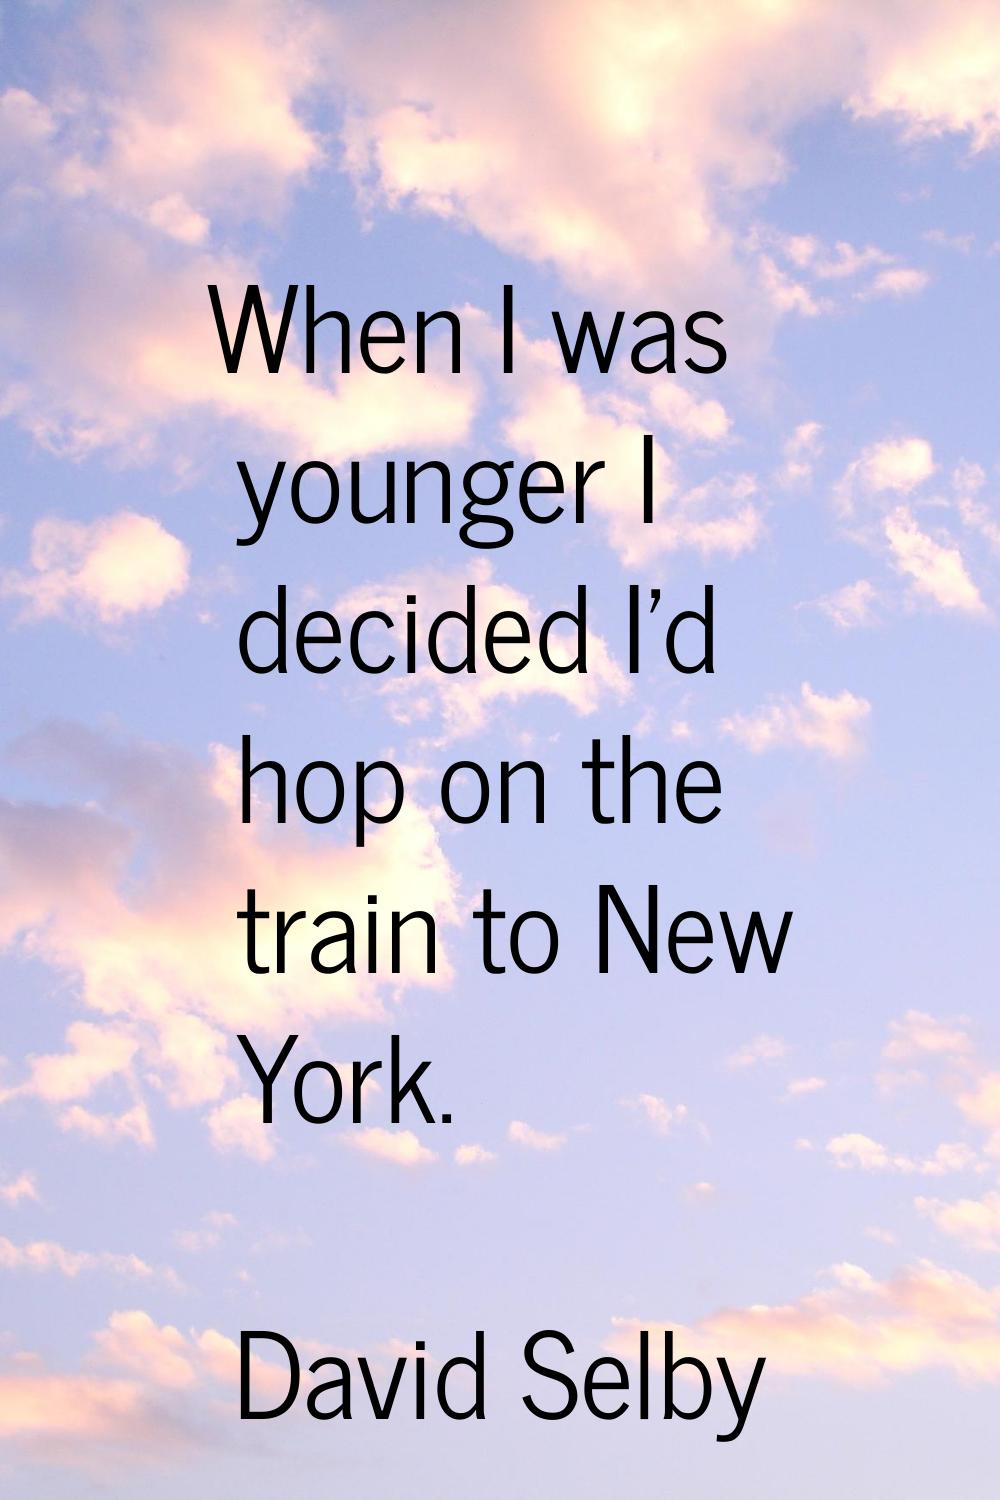 When I was younger I decided I'd hop on the train to New York.